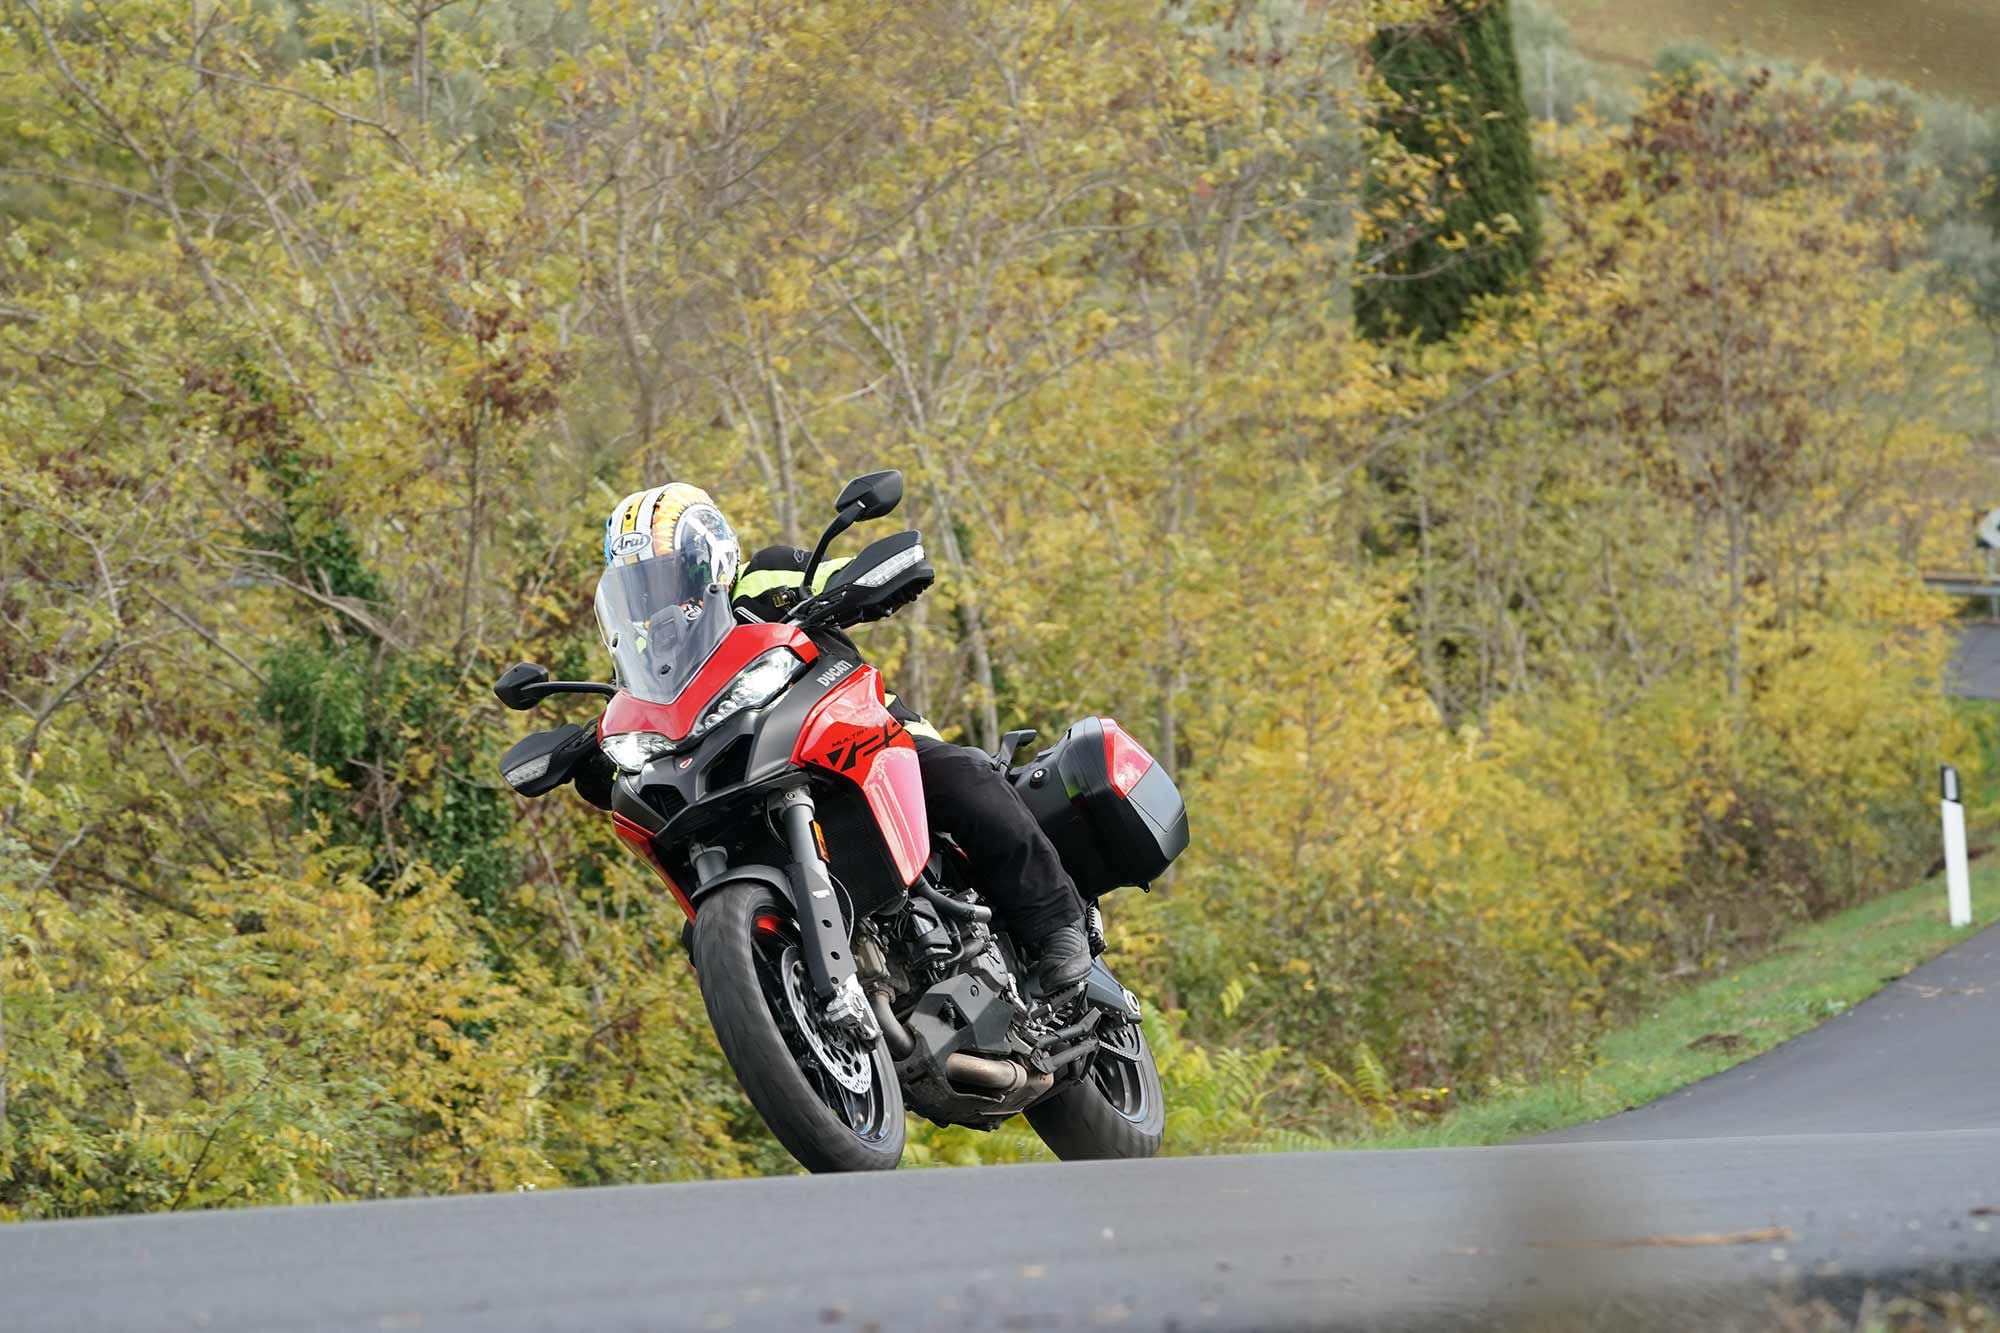 Moving through the countryside is smooth and effortless on the Multistrada V2 S.